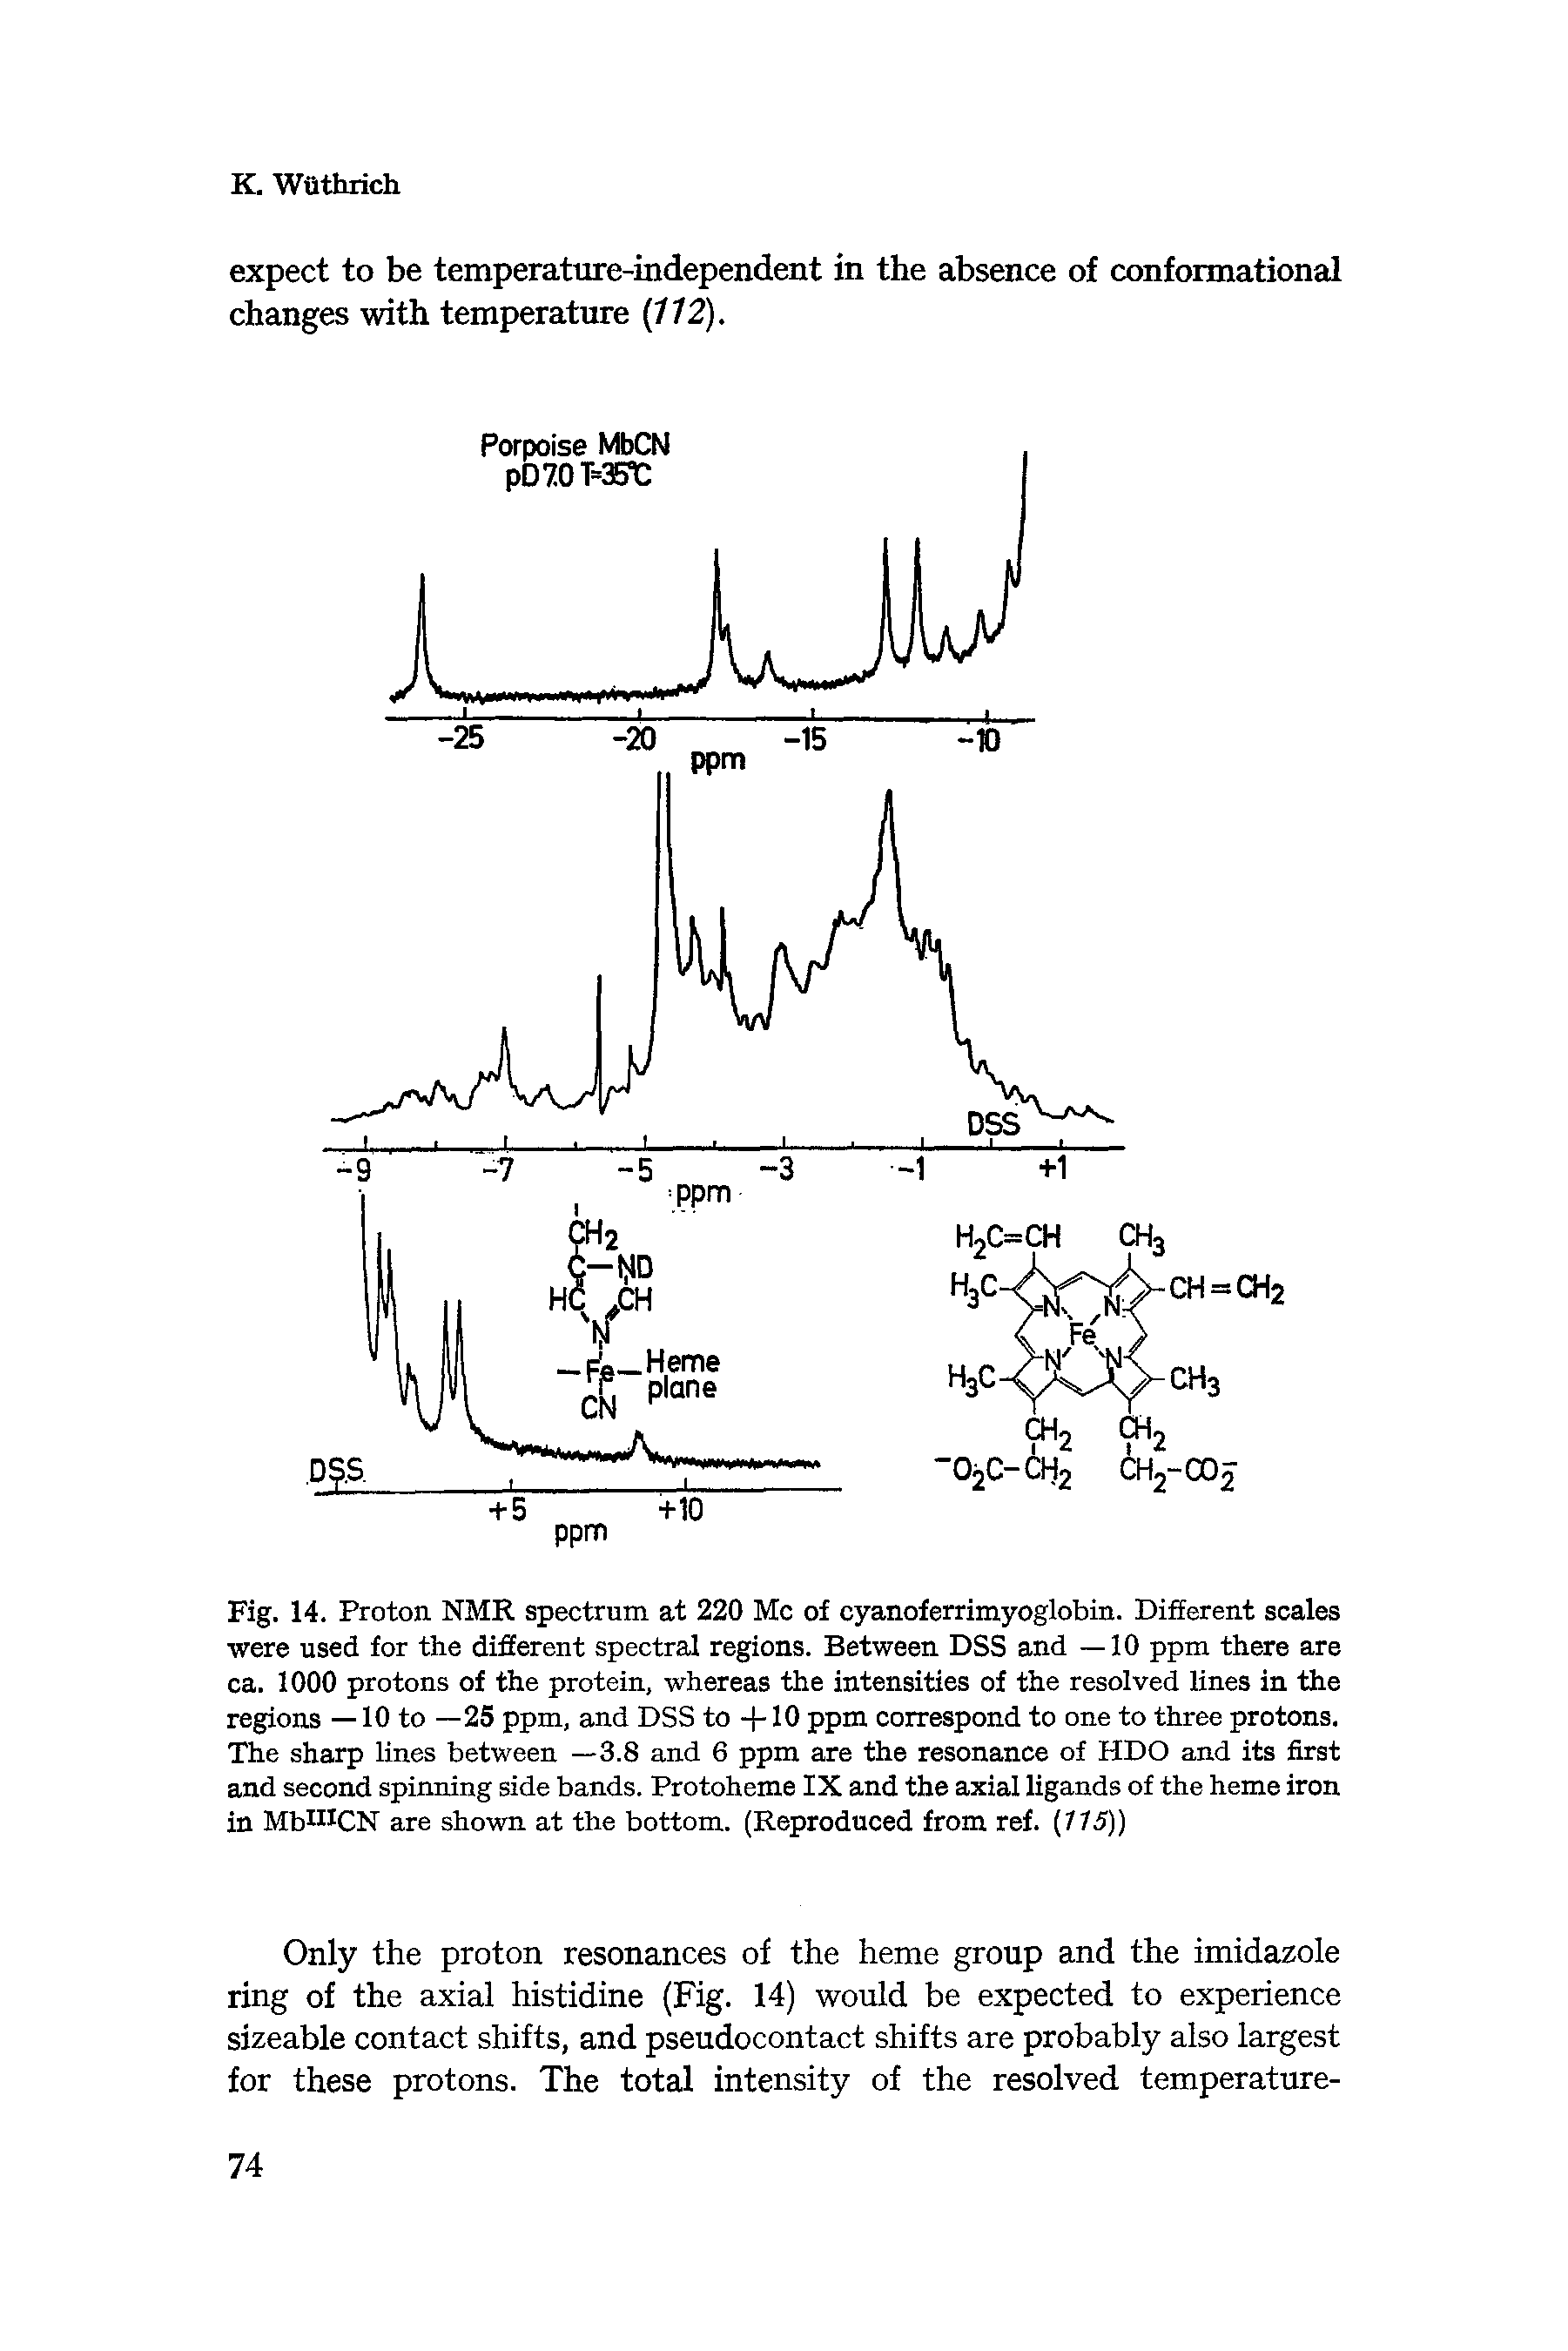 Fig. 14. Proton NMR spectrum at 220 Me of cyanoferrimyoglobin. Different scales were used for the different spectral regions. Between DSS and —10 ppm there are ca. 1000 protons of the protein, whereas the intensities of the resolved lines in the regions —10 to —25 ppm, and DSS to +10 ppm correspond to one to three protons. The sharp lines between —3.8 and 6 ppm are the resonance of HDO and its first and second spinning side bands. Protoheme IX and the axial ligands of the heme iron in MbUICN are shown at the bottom. (Reproduced from ref. (115))...